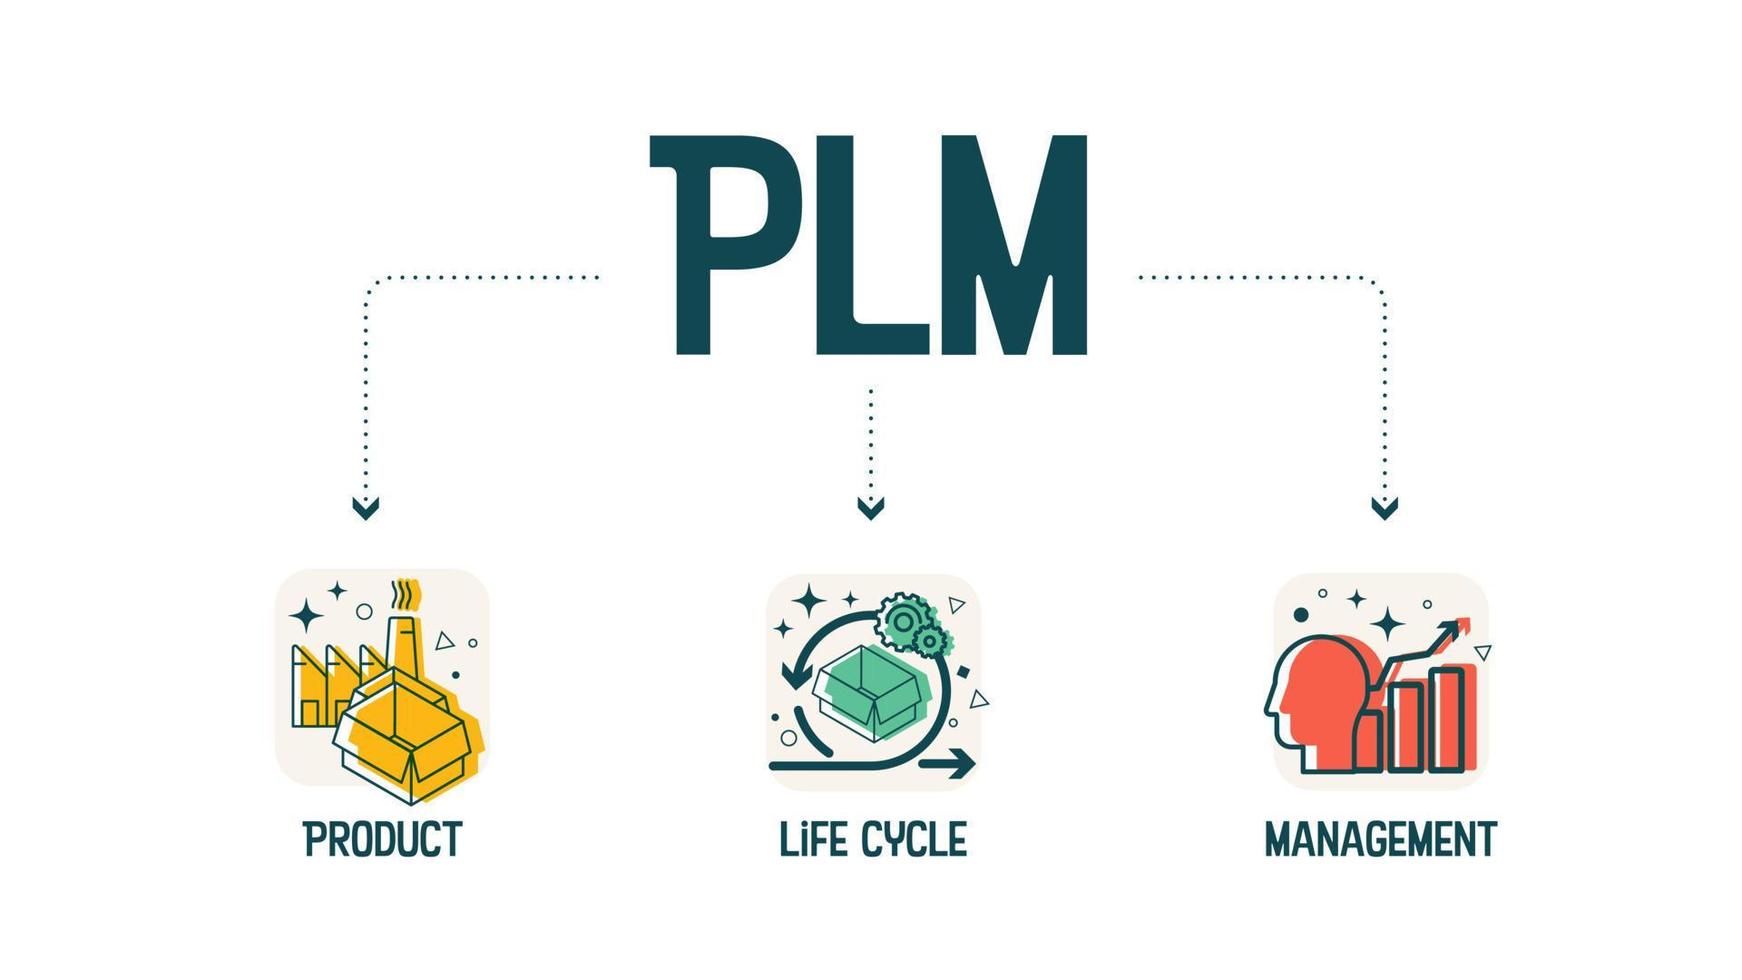 The vector infographic PLM - Product Lifecycle Management acronyms is a process of managing the entire lifecycle of a product from inception, through engineering design and manufacture, to service